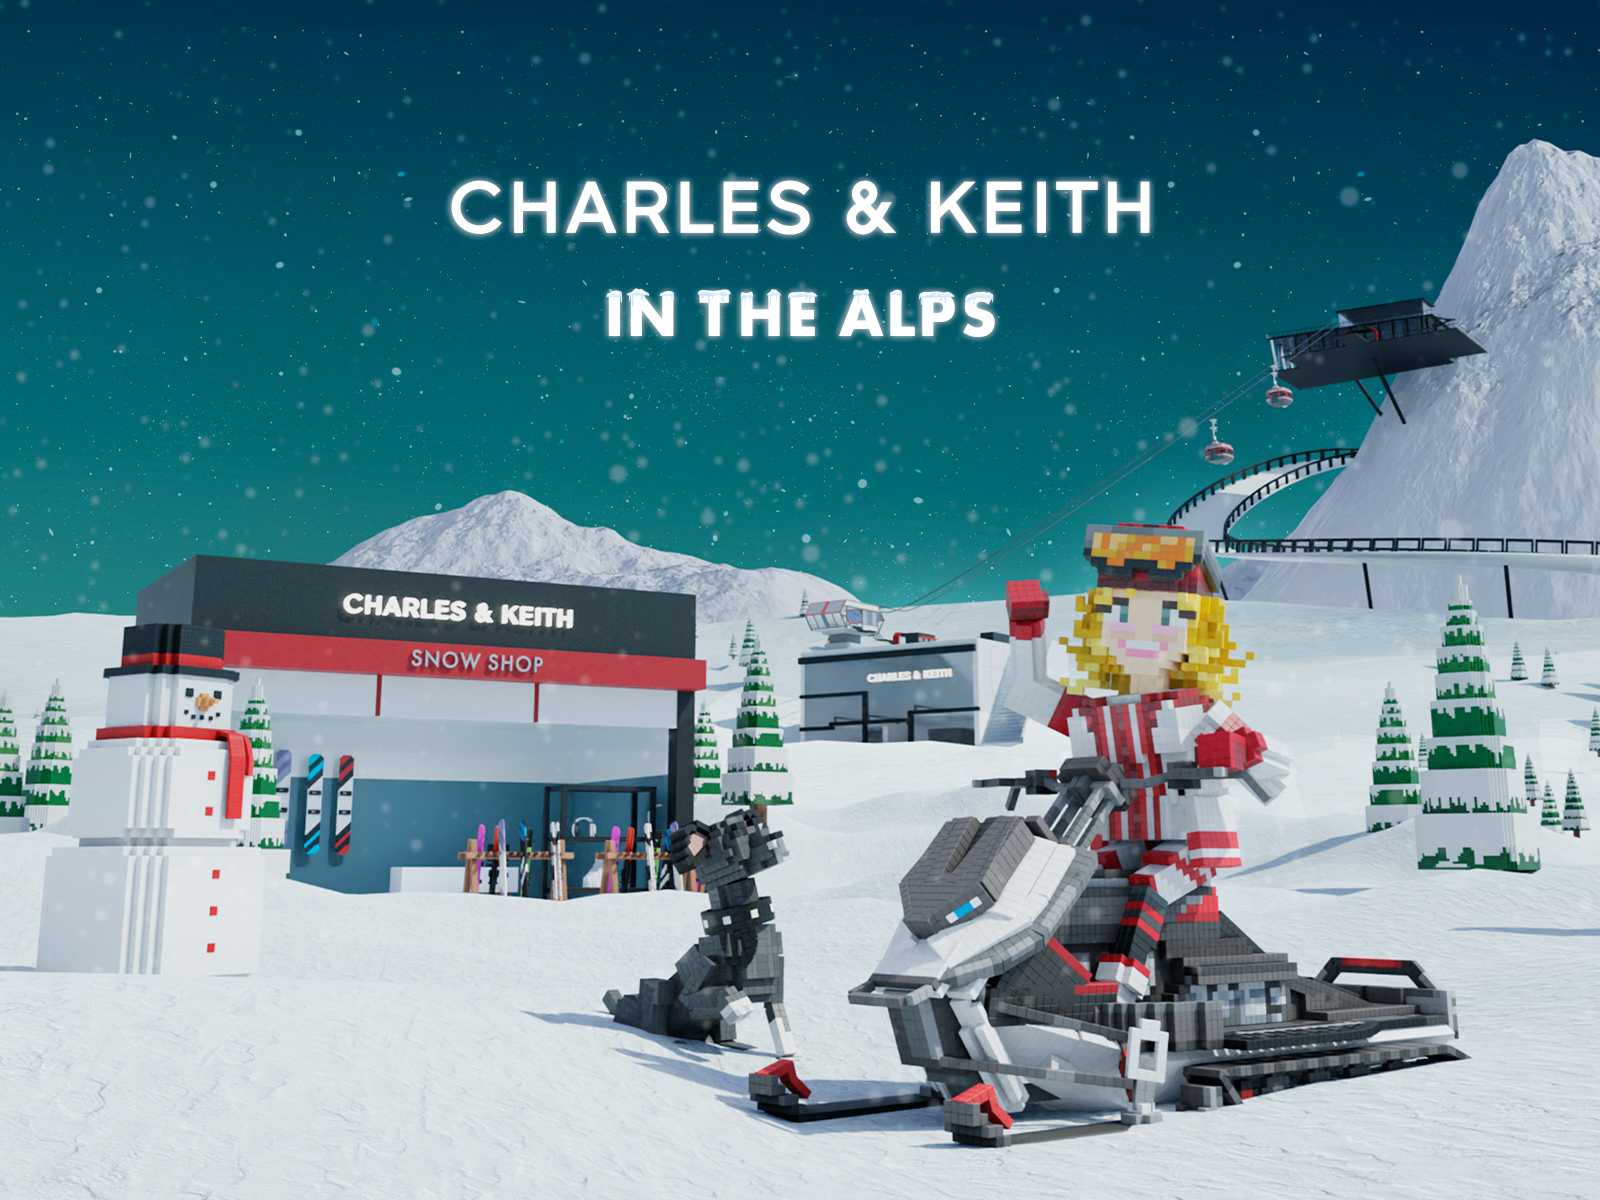 CHARLES & KEITH IN THE ALPS